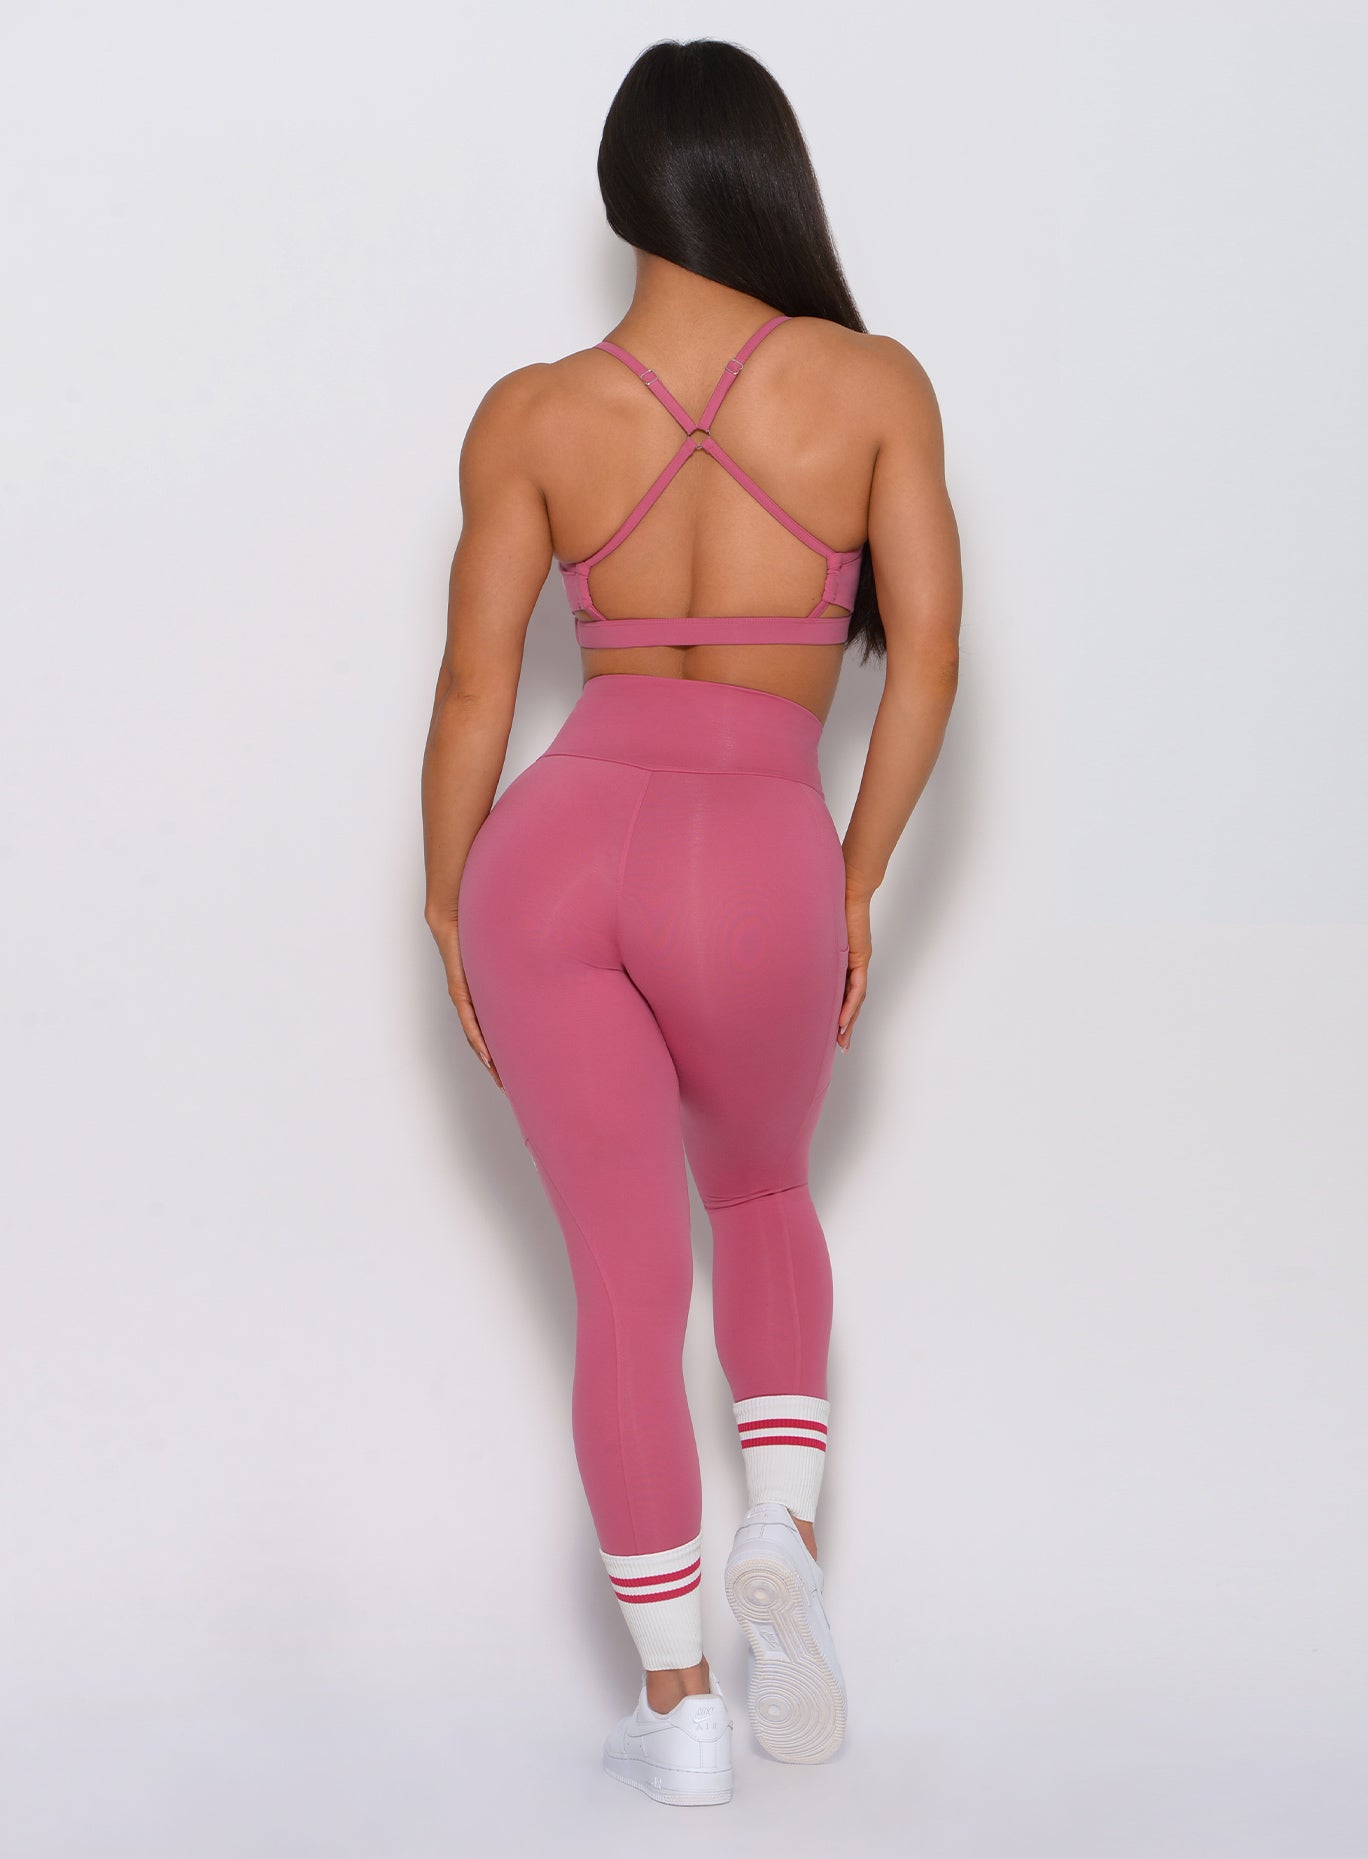 Full back view of the model wearing our pumped sports bra in blush color and a matching high waist leggings